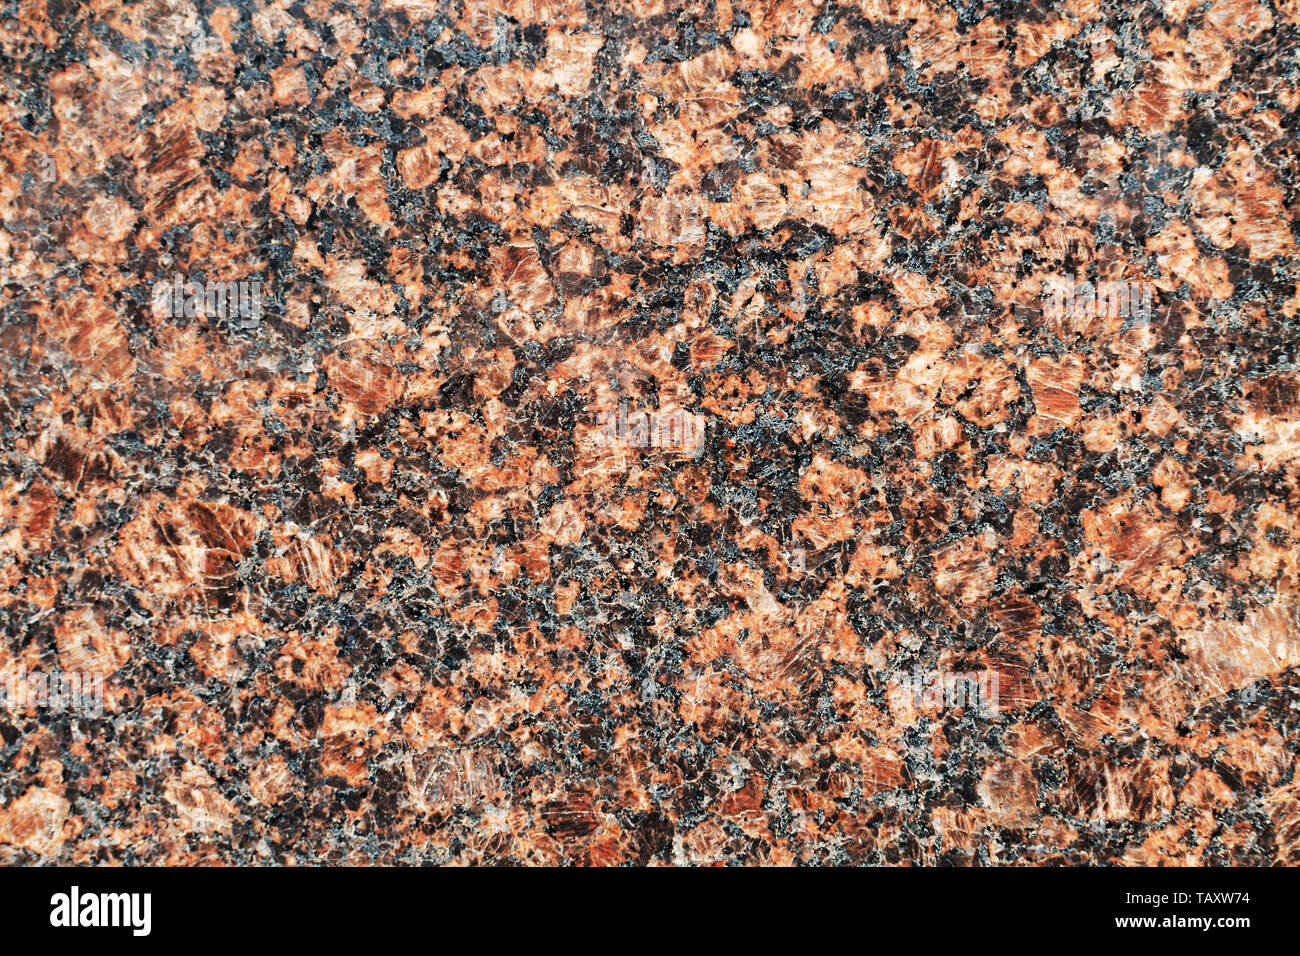 Glossy polished abstract texture of rapakivi granite consists of oligoclase, orthoclase, idiomorphic quartz with black coral chaotic splashes. Stock Photo